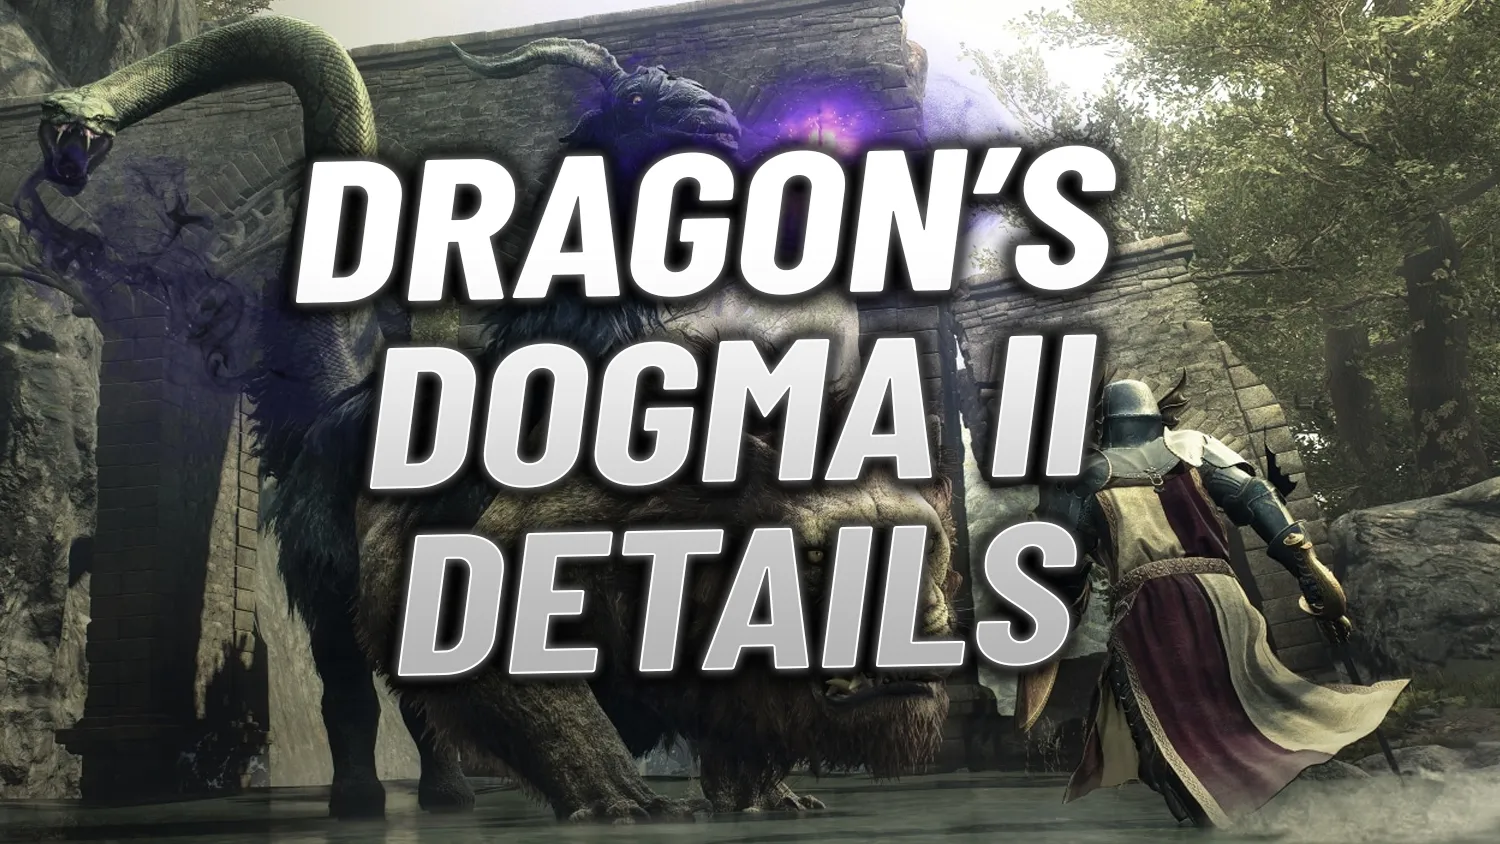 Dragon's Dogma 2 Steam Page Confirms Release Date Ahead of